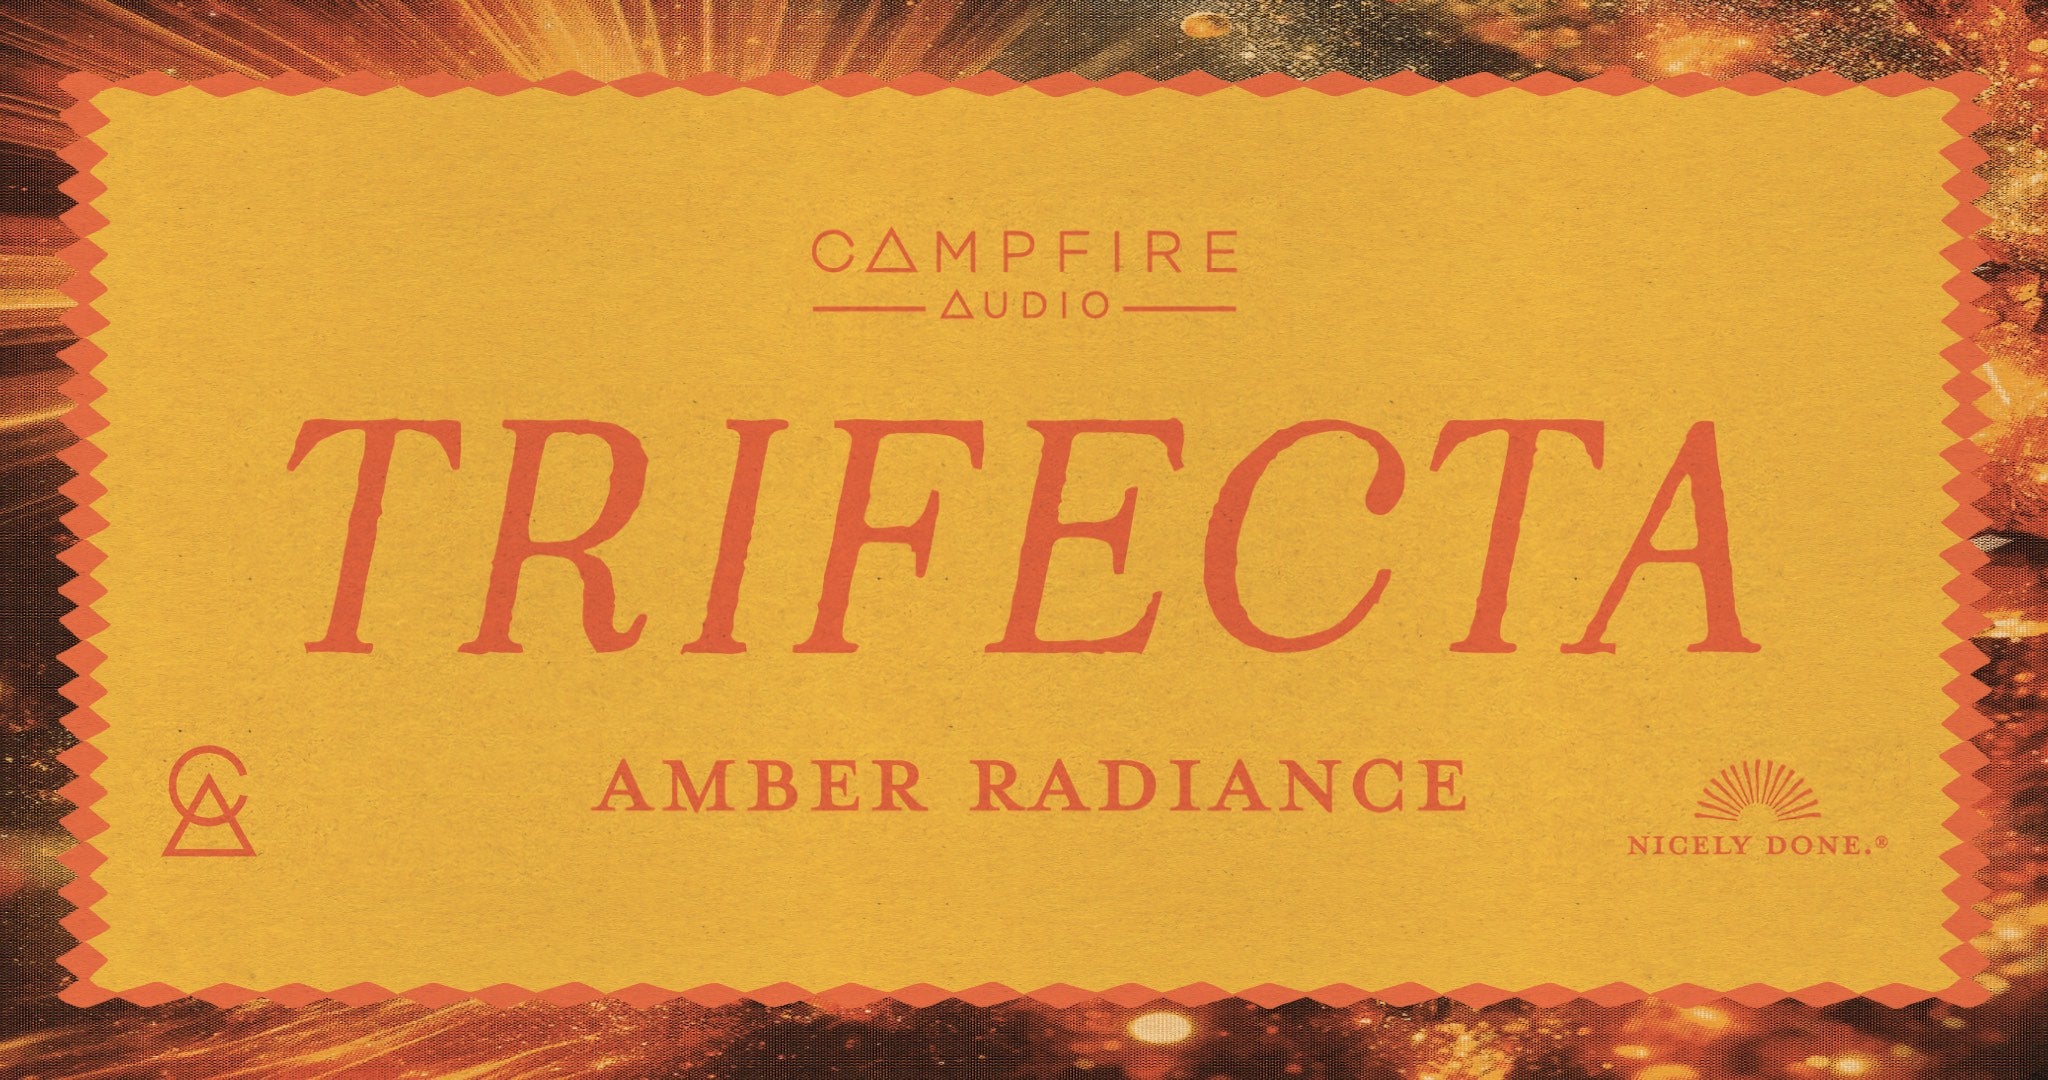 Campfire Trifecta Amber Radiance banner with radiant sun border